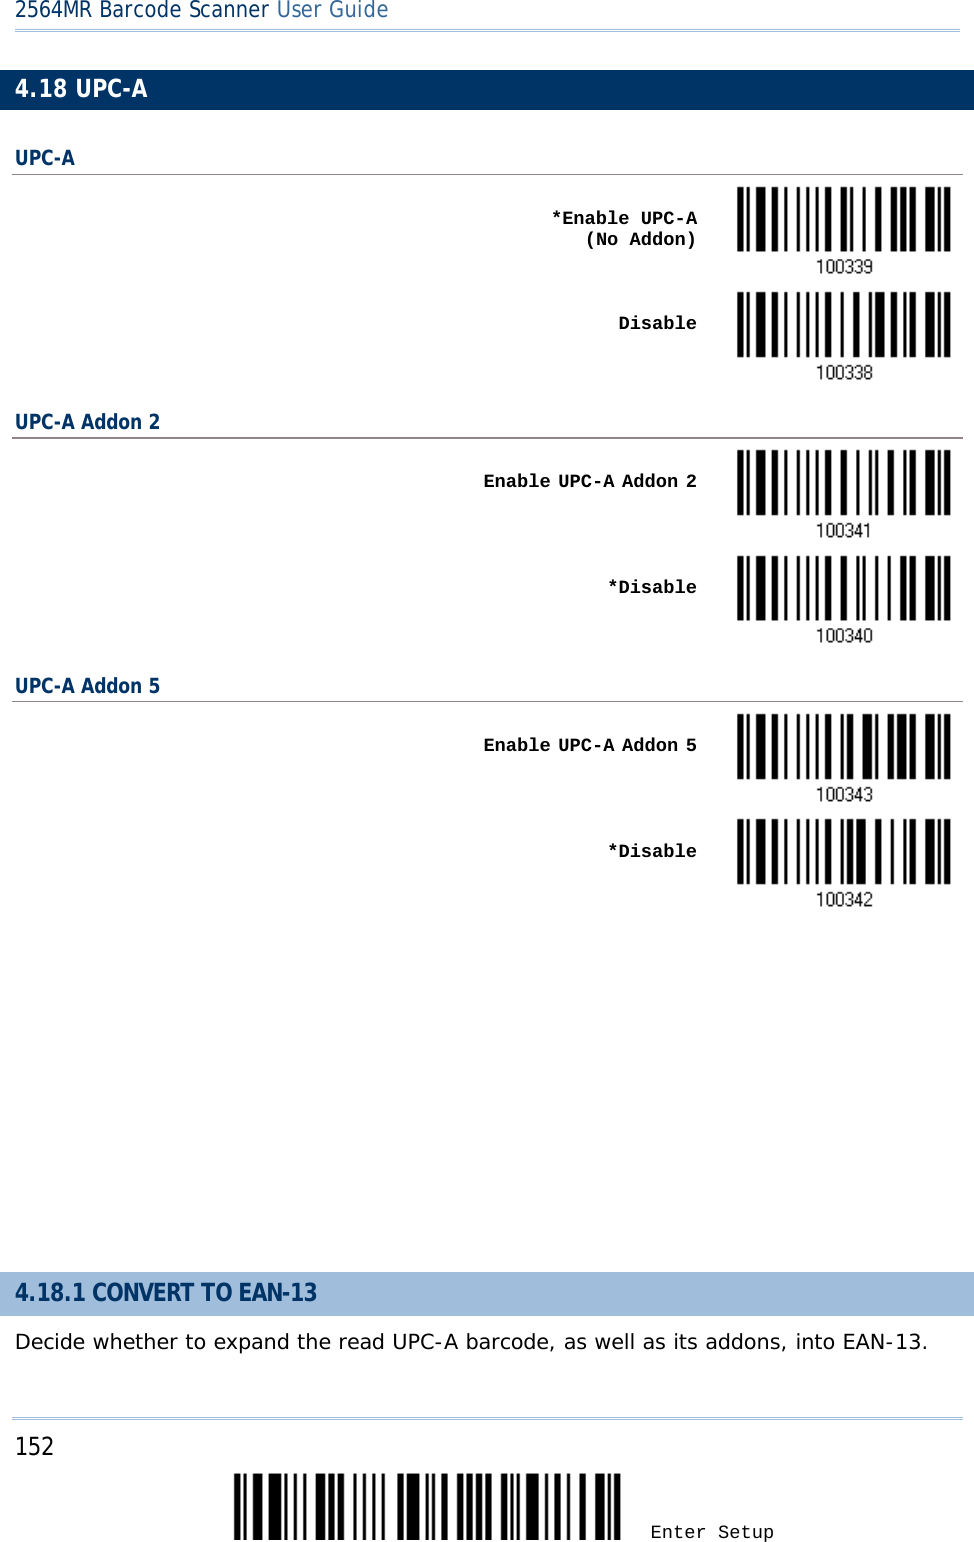 2564MR Barcode Scanner User Guide  4.18 UPC-A UPC-A    *Enable UPC-A     (No Addon)     Disable  UPC-A Addon 2    Enable UPC-A Addon 2     *Disable  UPC-A Addon 5    Enable UPC-A Addon 5     *Disable           4.18.1 CONVERT TO EAN-13 Decide whether to expand the read UPC-A barcode, as well as its addons, into EAN-13.  152 Enter Setup 